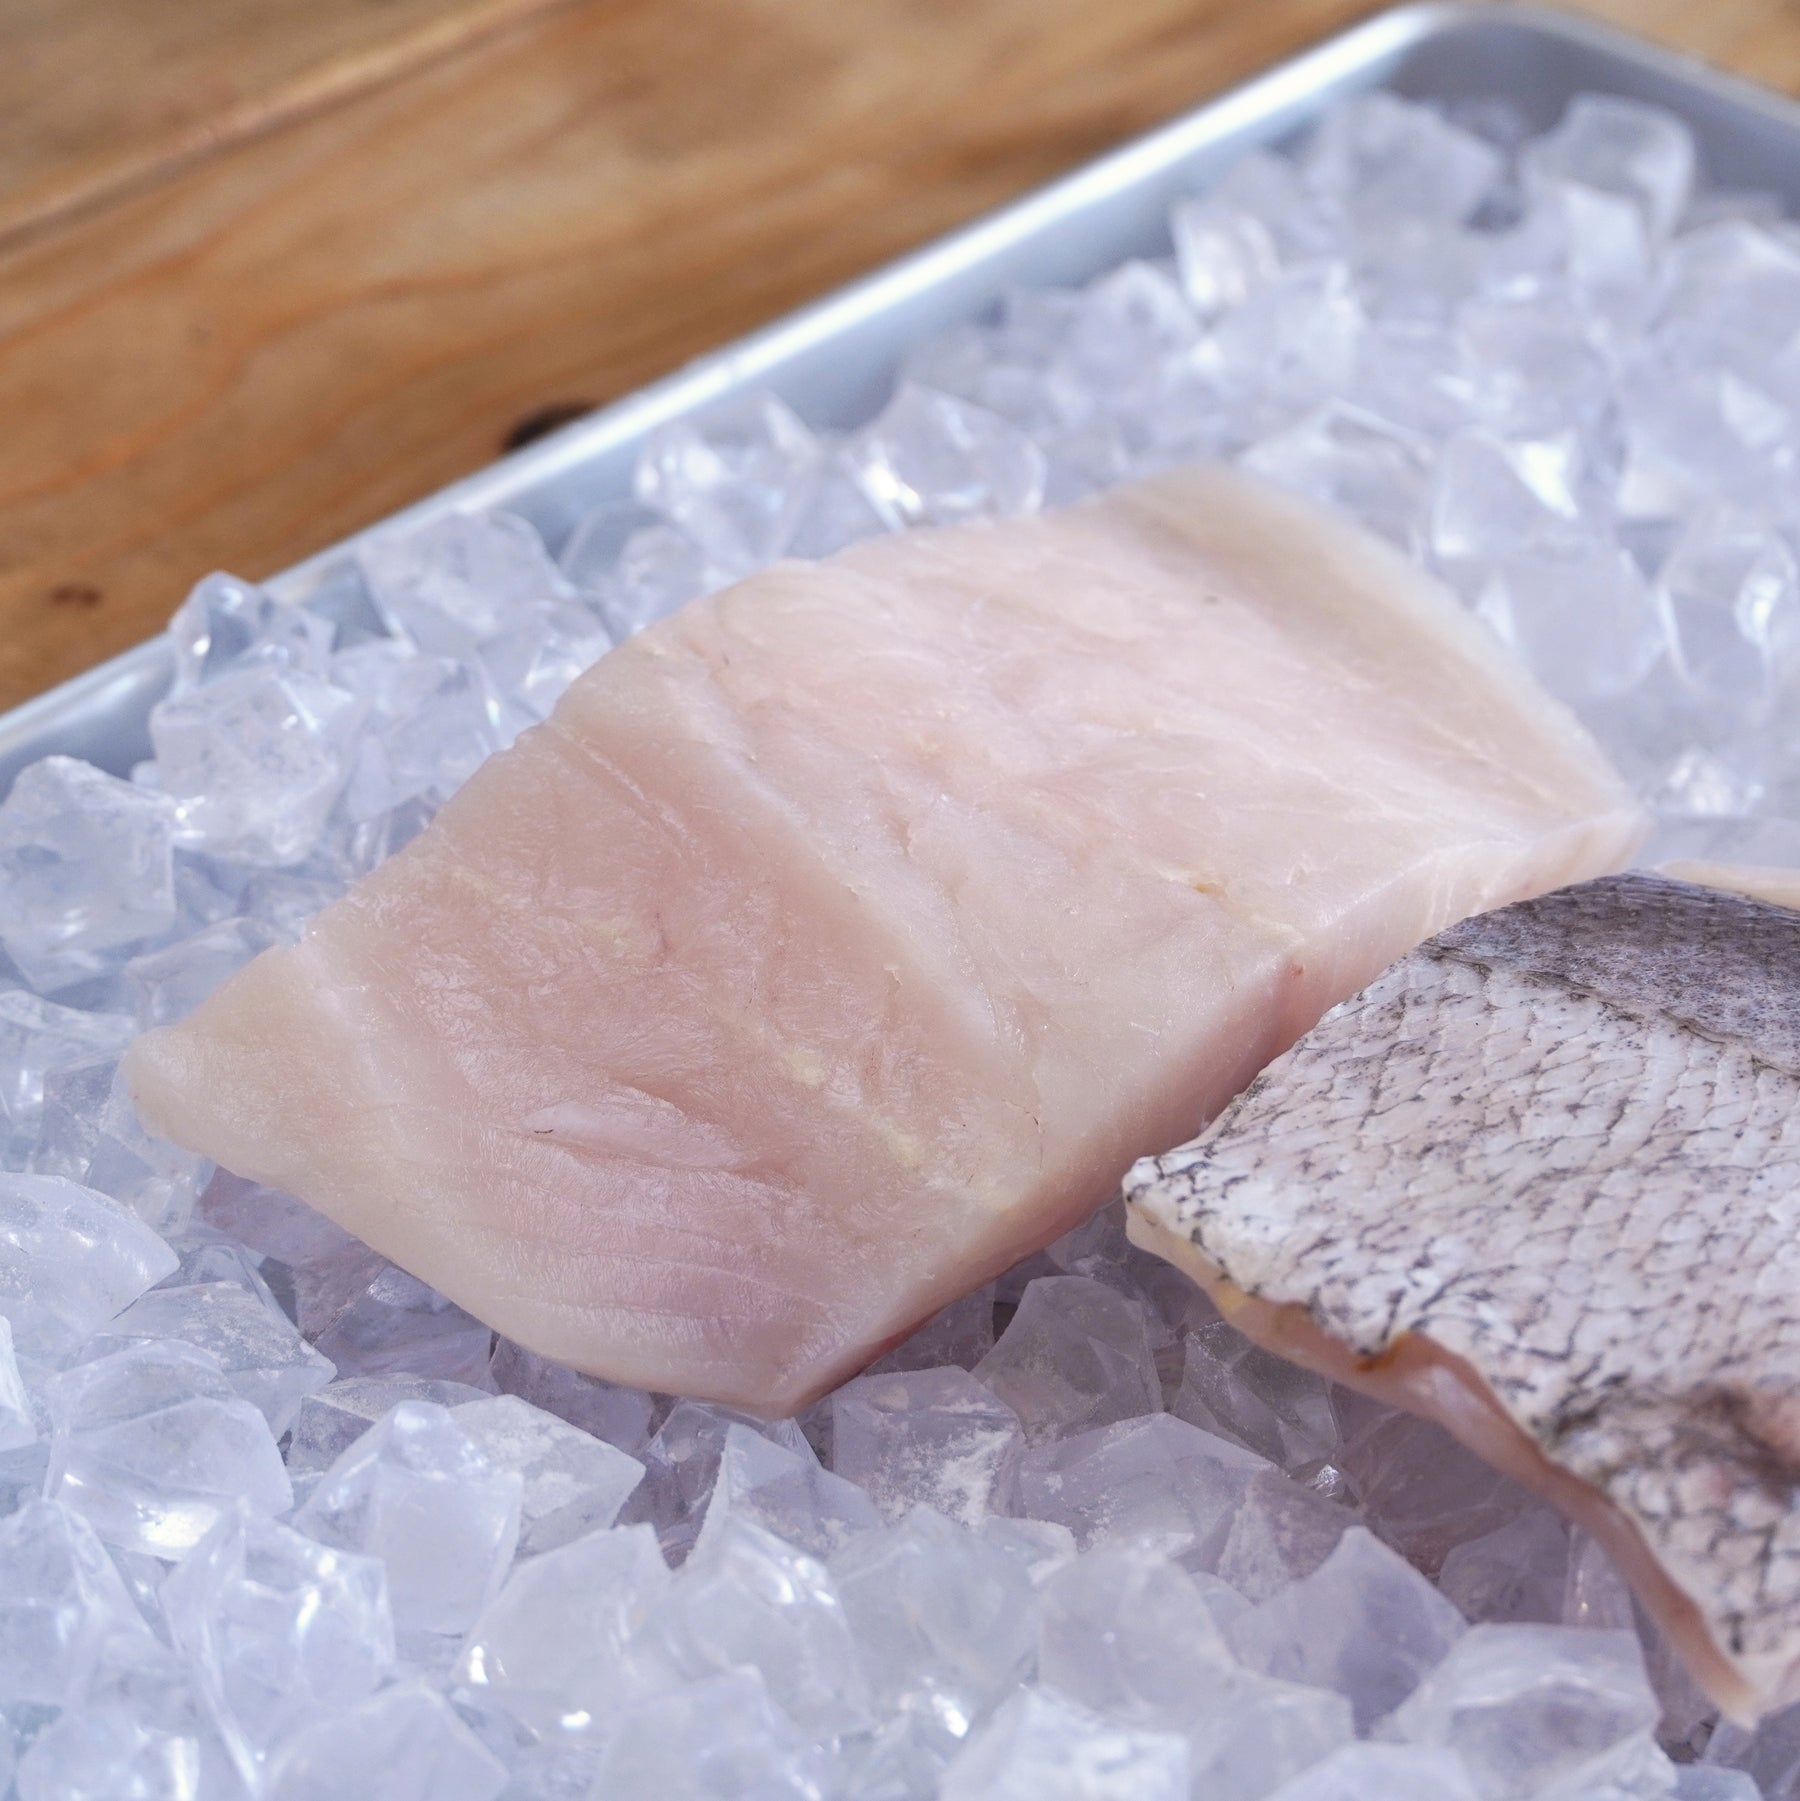 Wild-Caught Hake Fish Fillets from New Zealand (450g) - Horizon Farms